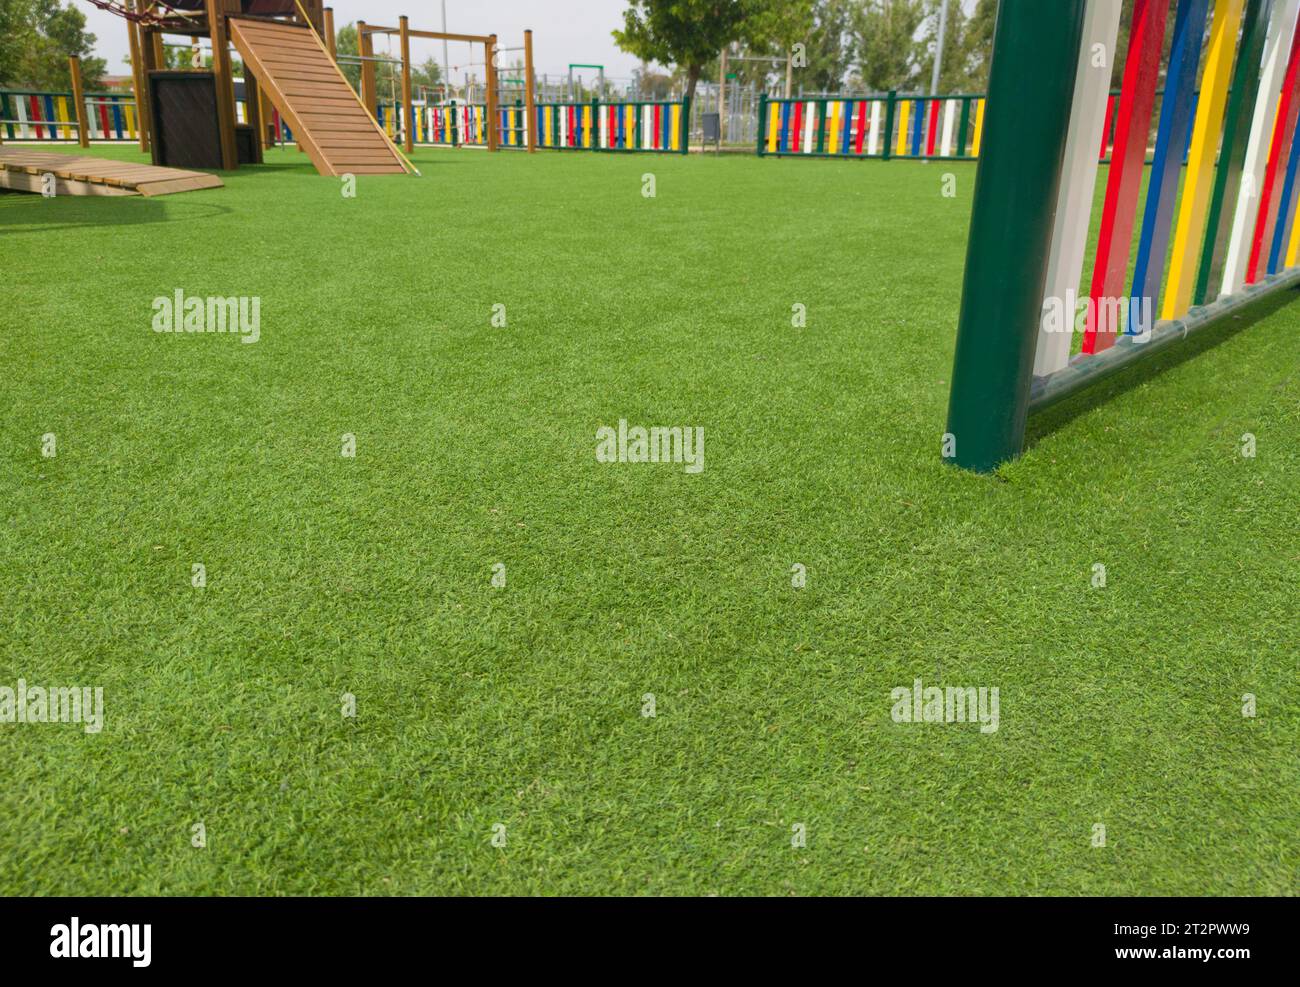 Artificial green grass floor on playground. Colourful rows of painted posts arround Stock Photo